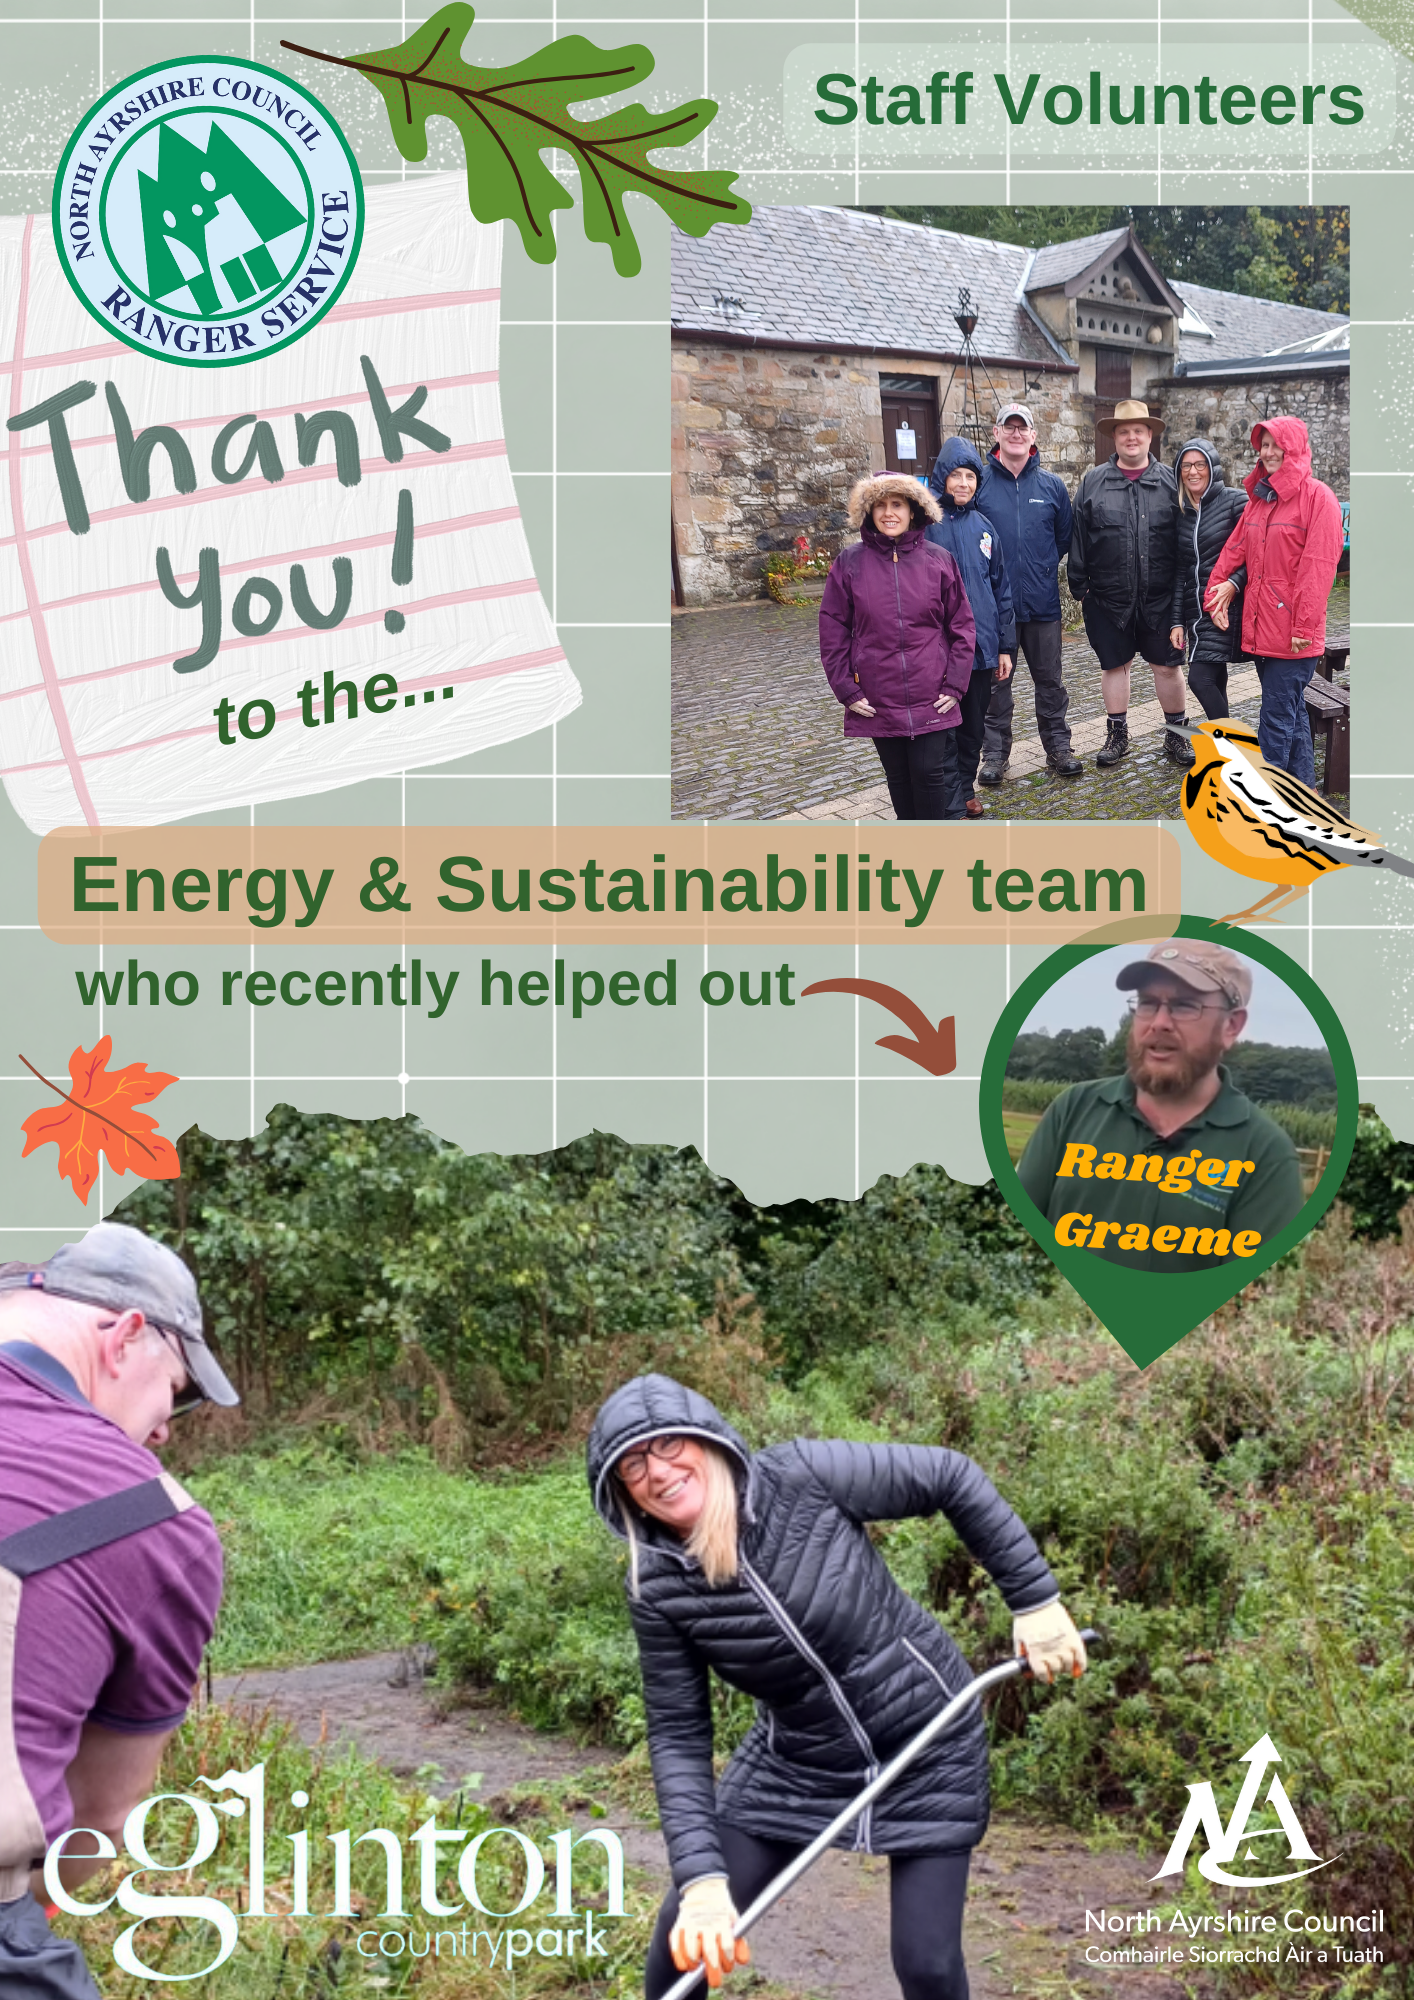 Decorative graphic from the recent Staff Volunteering at Eglinton Country park with the Energy and Sustainability team who are standing as a group with another picture of two colleagues digging a raised bed - desin also has nature icons includin a bird, squirrel and leaves and a picture of ranger graham